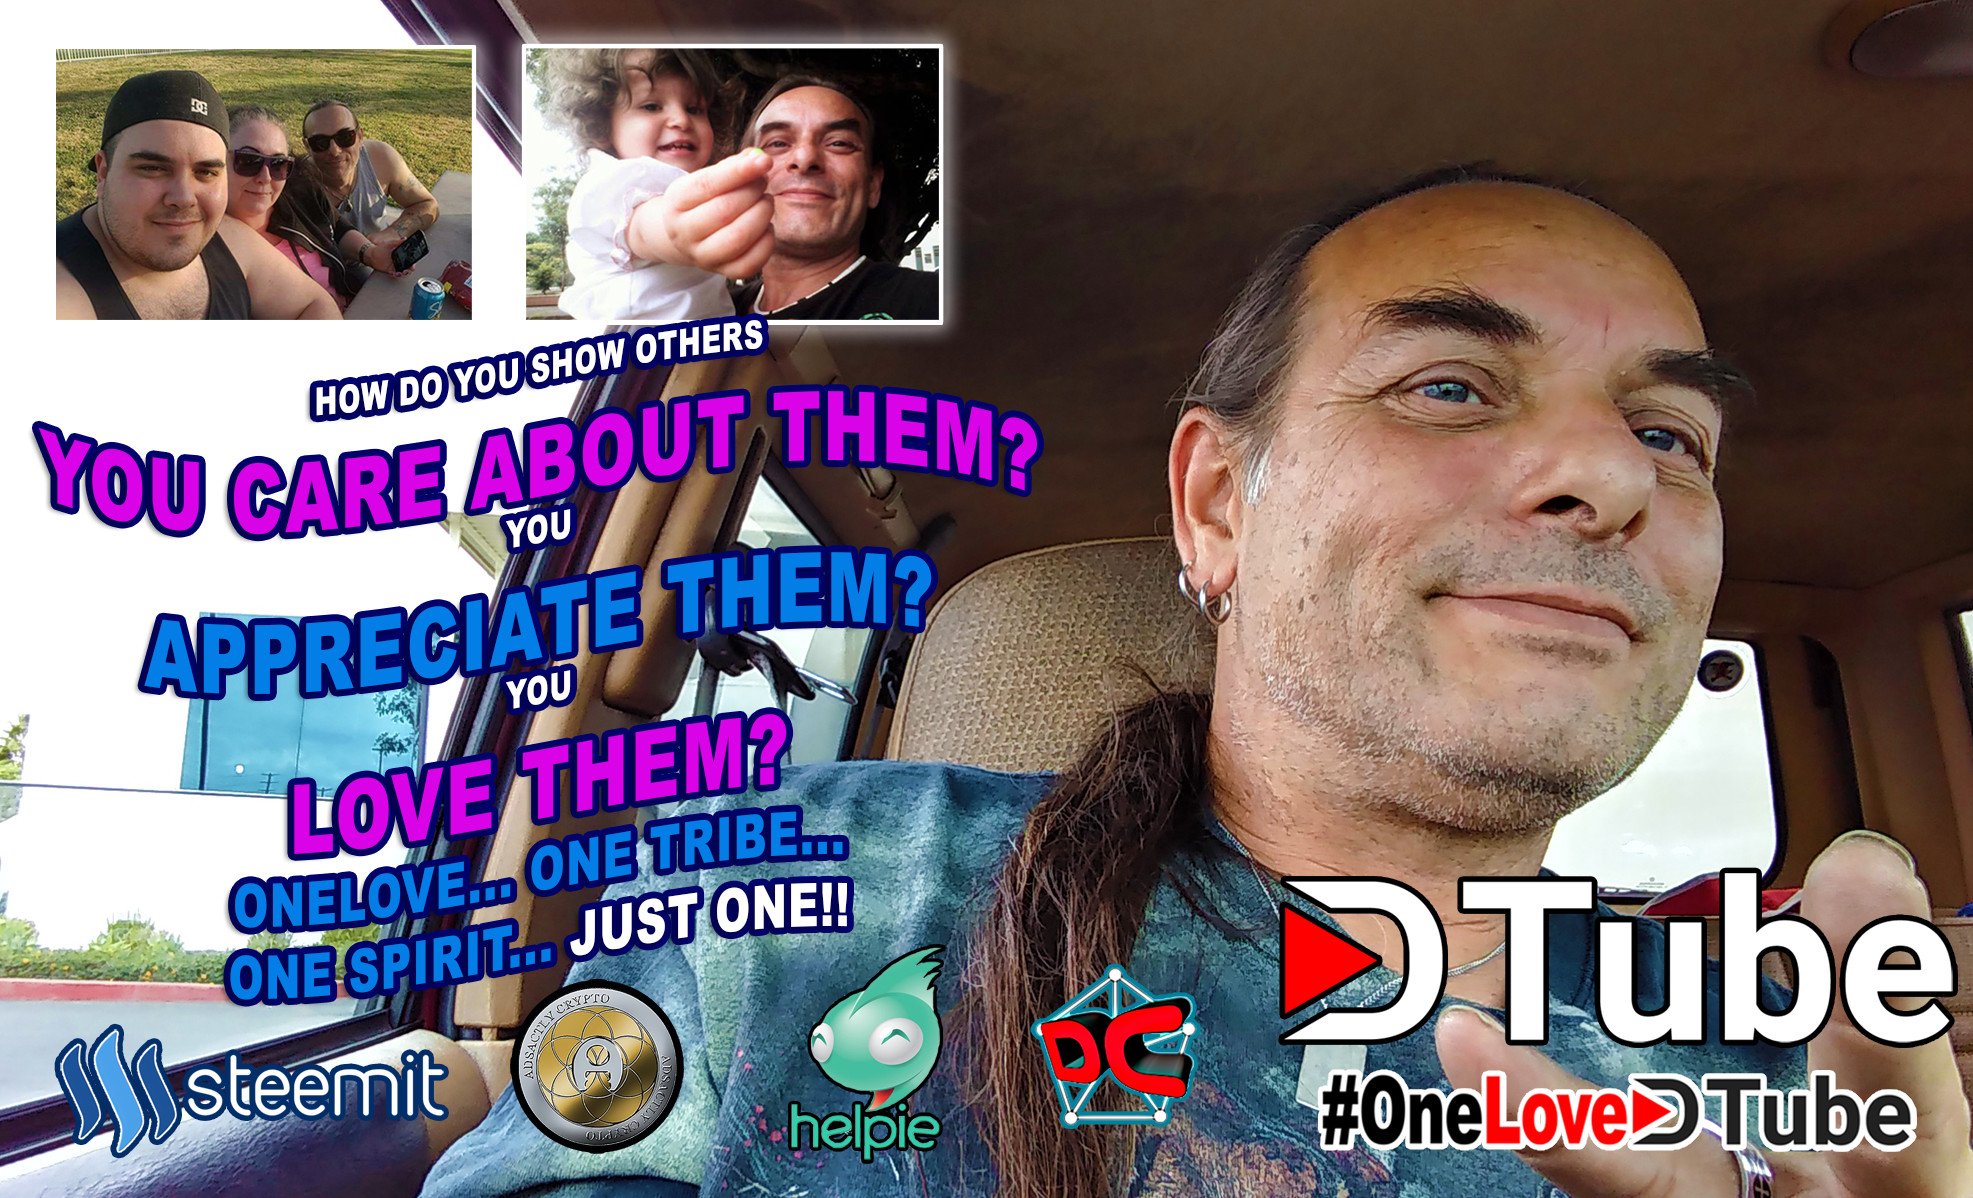 HOW DO YOU SHOW OTHERS YOU CARE ABOUT THEM - APPRECIATE THEM - LOVE THEM - ONELOVE... ONE TRUIBE... ONE SPIRIT... JUST ONE.jpg